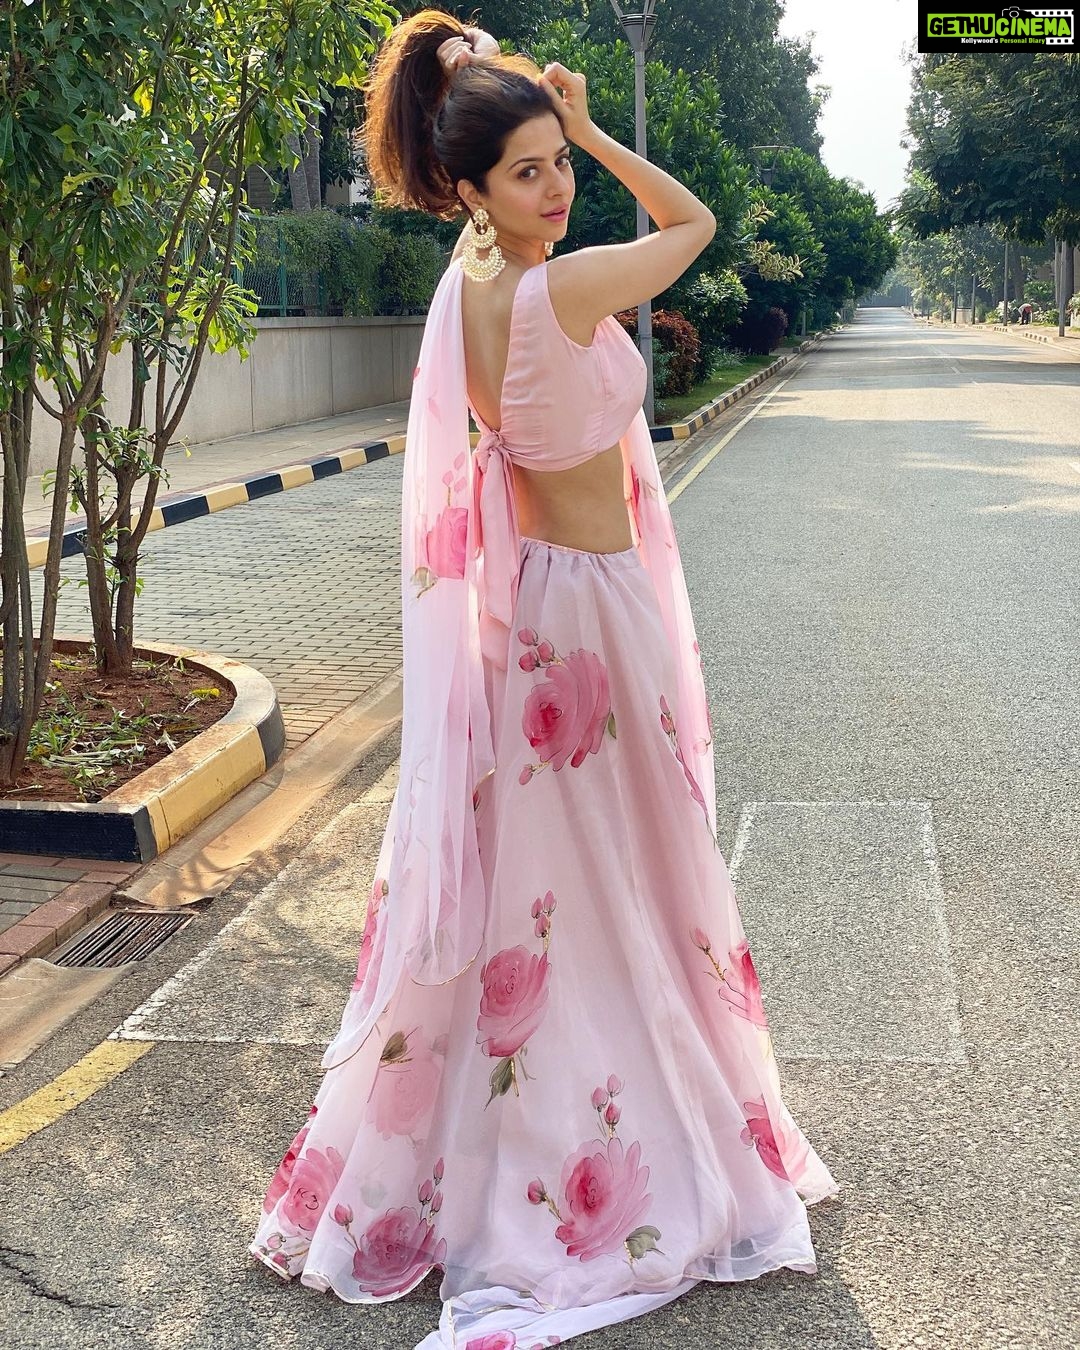 Vedhika - 185.8K Likes - Most Liked Instagram Photos